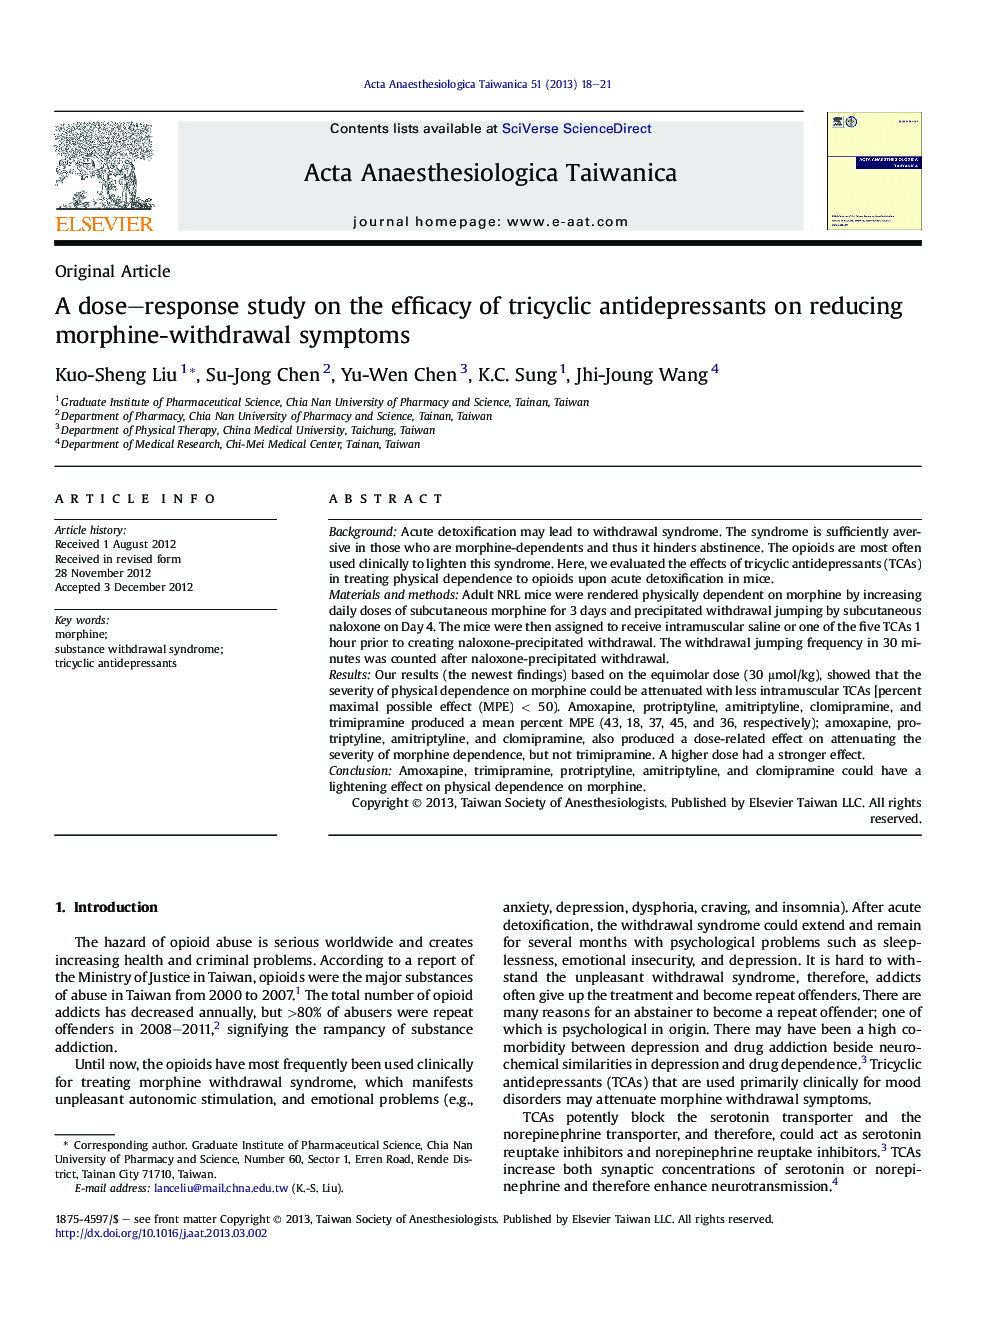 A dose–response study on the efficacy of tricyclic antidepressants on reducing morphine-withdrawal symptoms